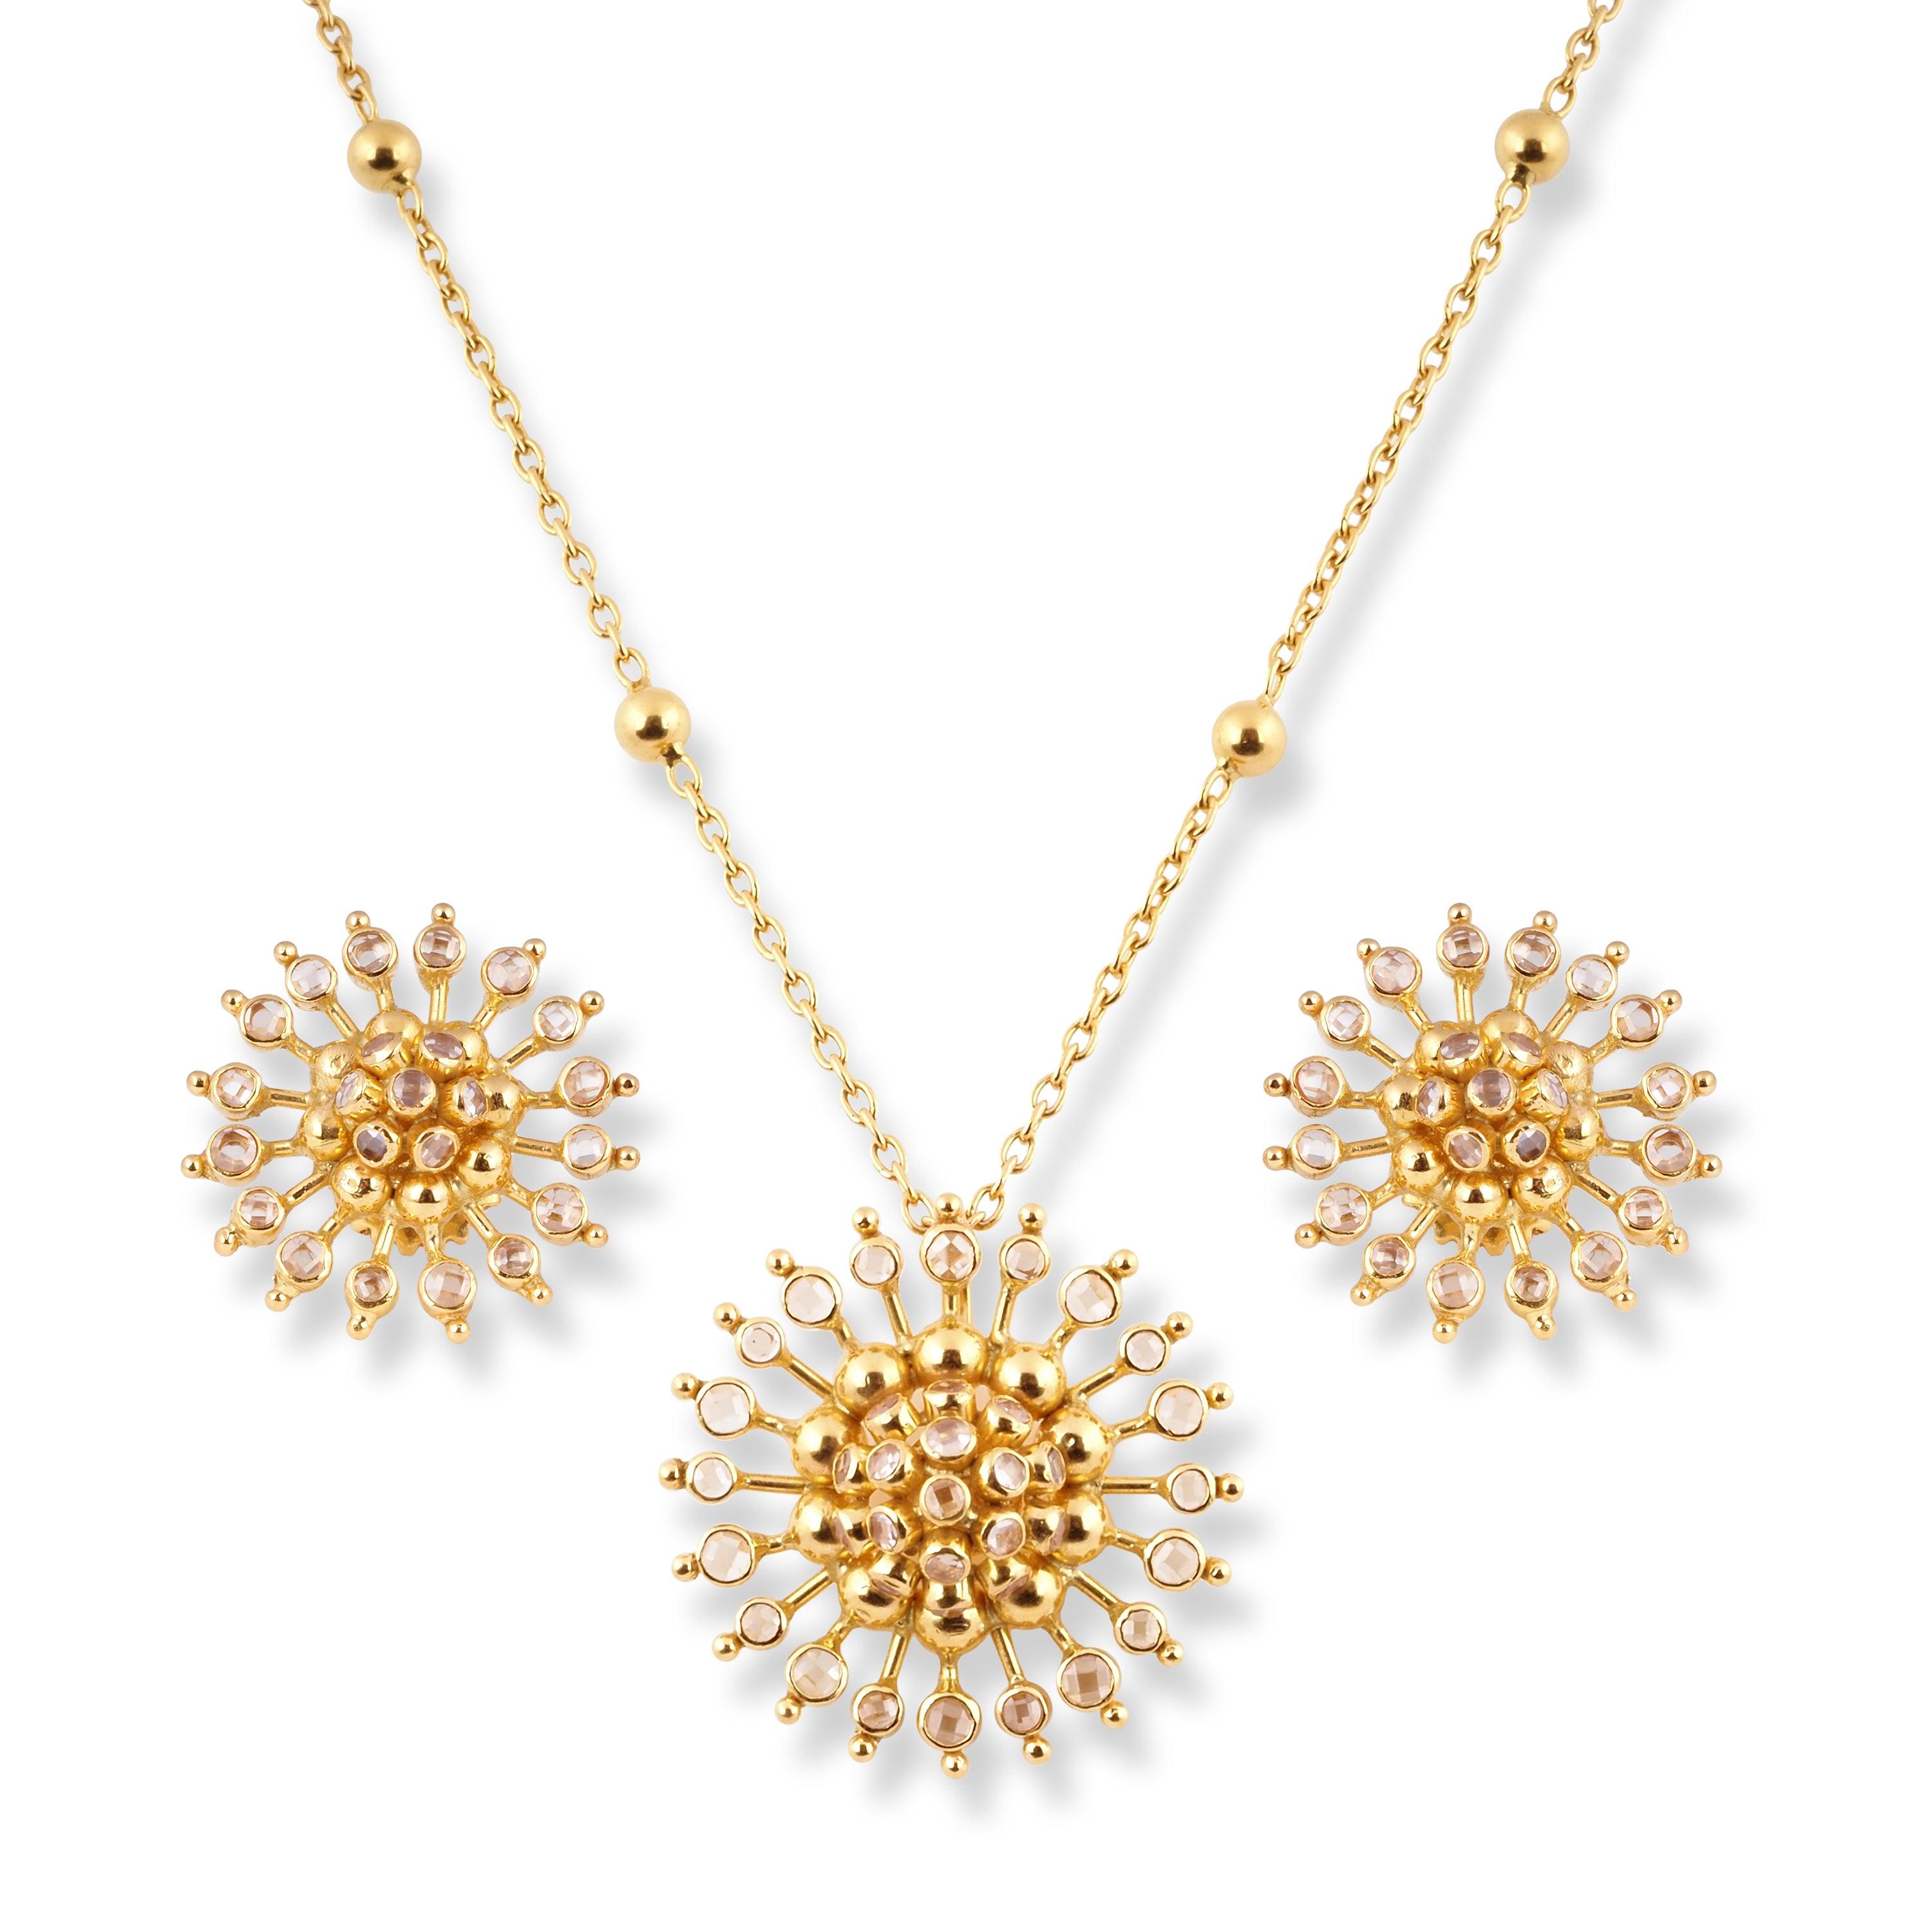 22ct Yellow Gold Necklace & Earrings with Polki Style Cubic Zirconia Stones N-7056 E-7056A - Minar Jewellers